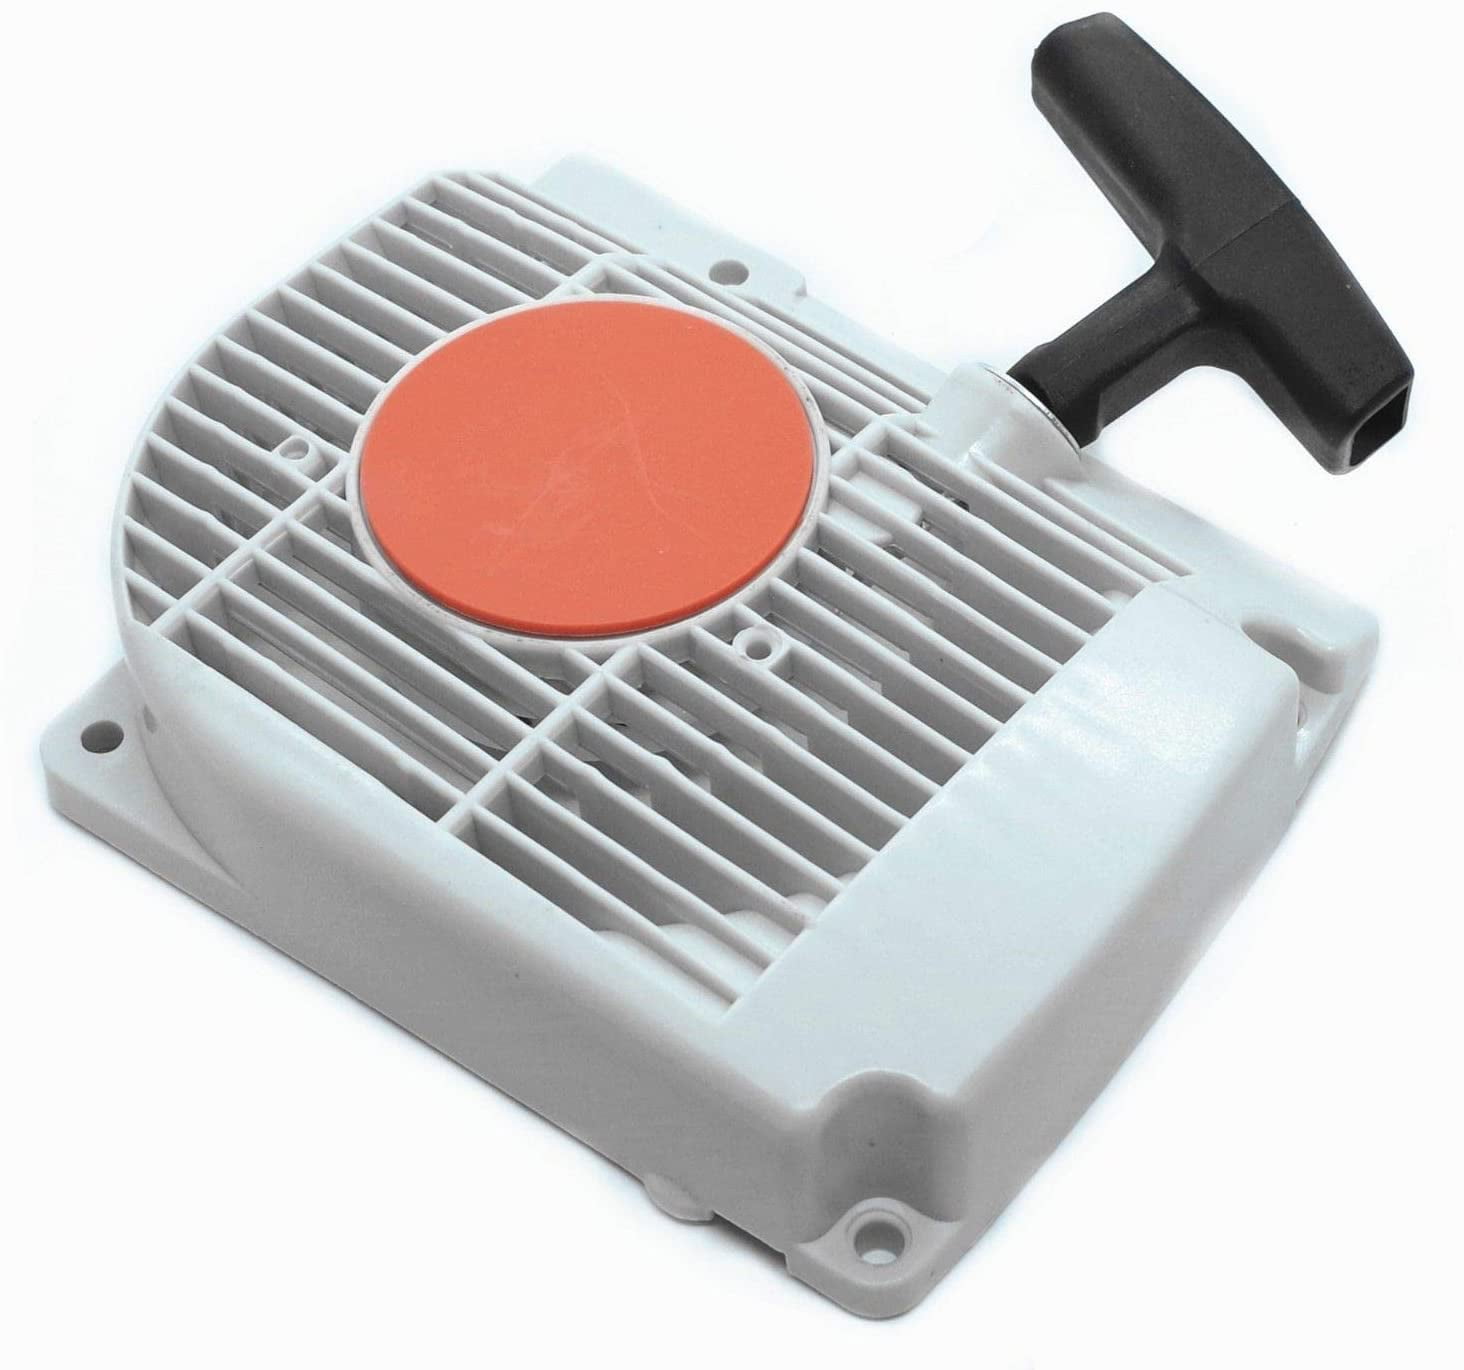 Recoil Rewind Pull Starter For STIHL 029 039 MS290 MS390 MS310 Chainsaw 